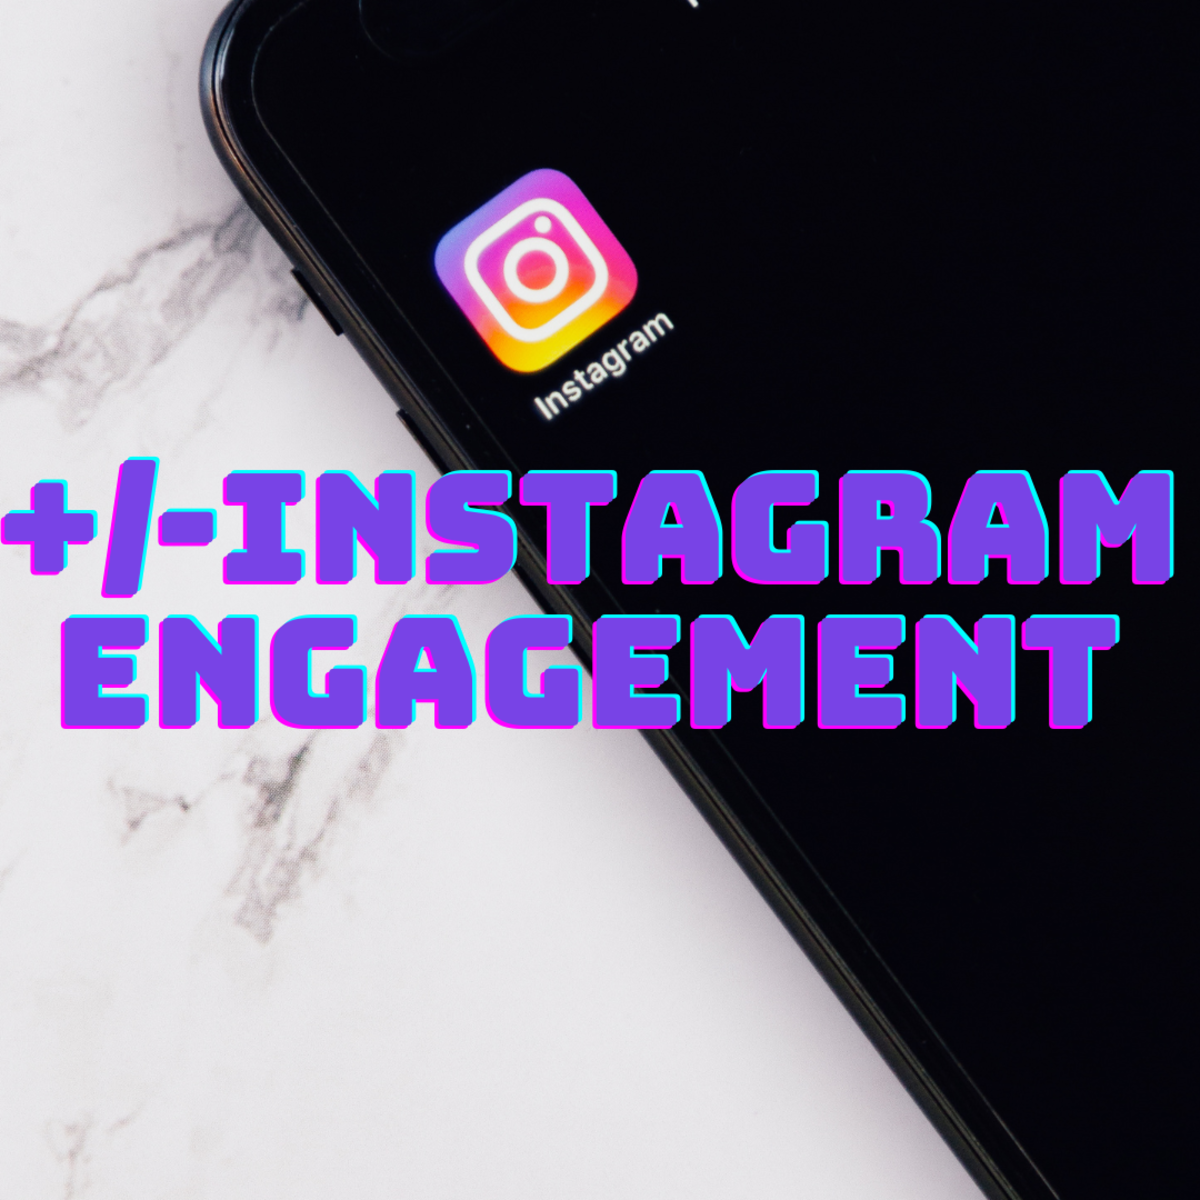 Learn how to better manage your Instagram engagement and boost metrics.